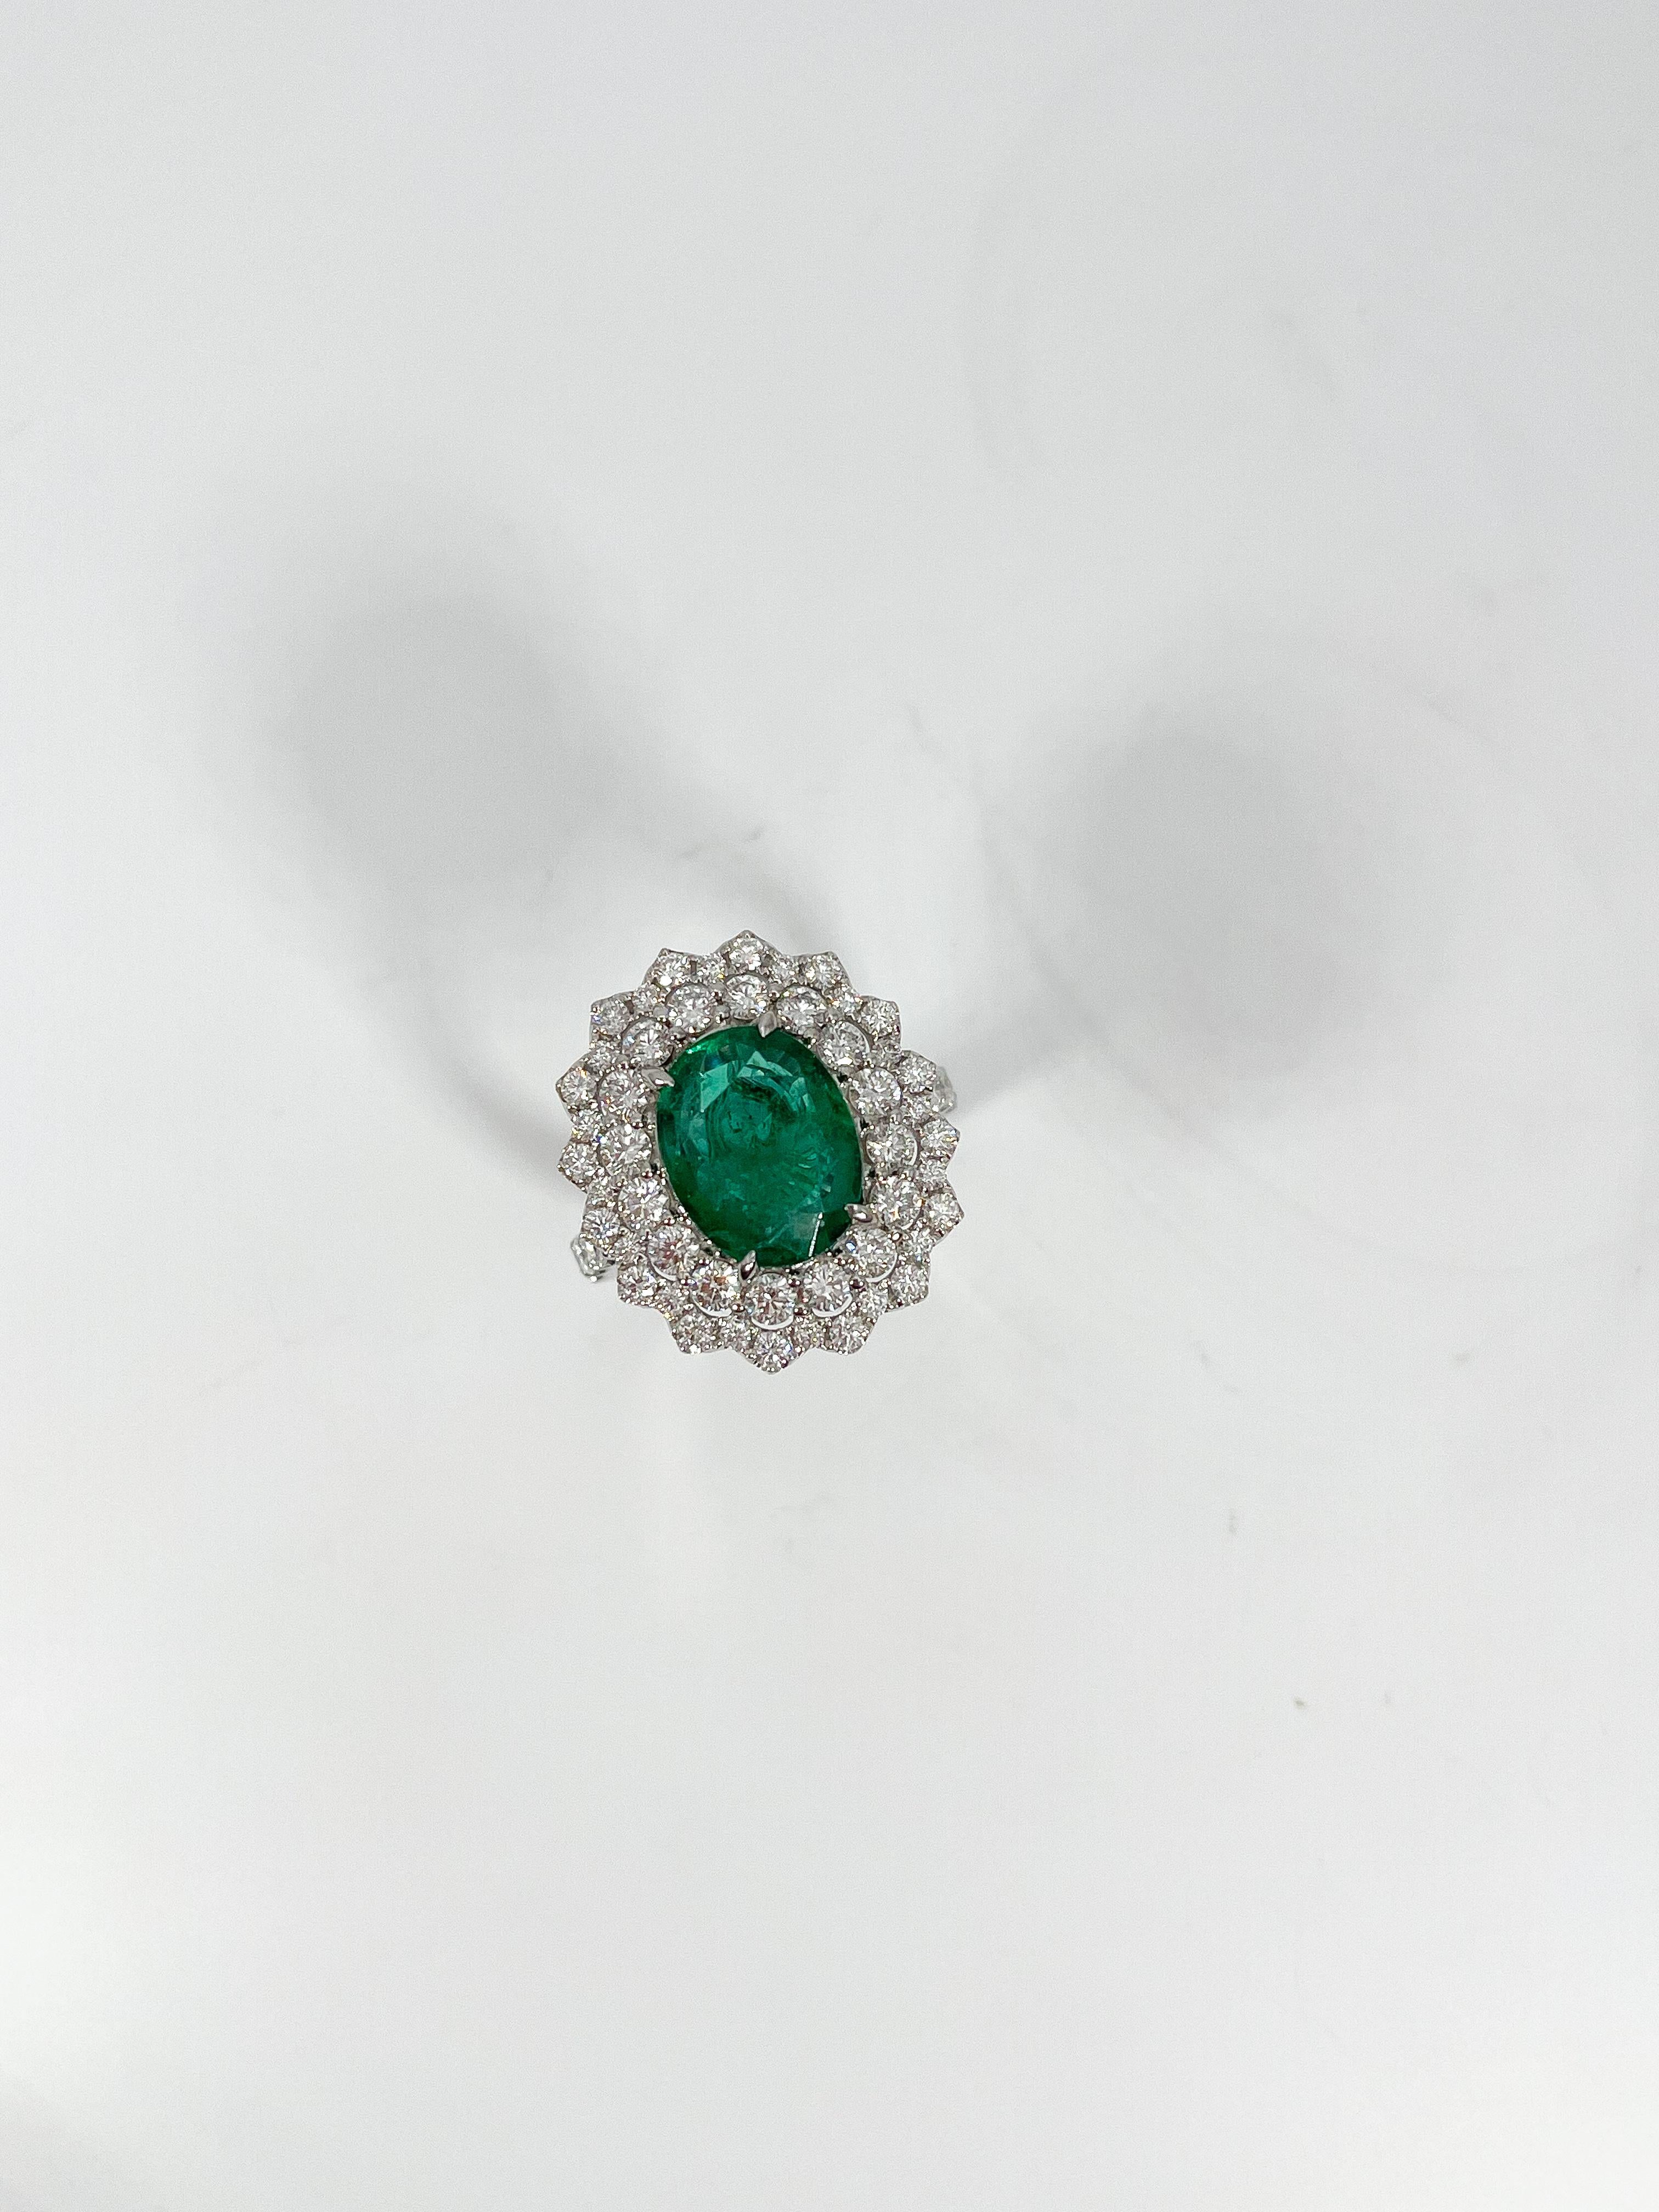 Ladies size 7 18k white gold ring prong and bead set with an oval brilliant cut emerald and round brilliant cut diamonds. Total item weight is 9.9 grams. Comes with AJI Certification. 
Emerald Attributes:
Shape and Cut- Oval brilliant